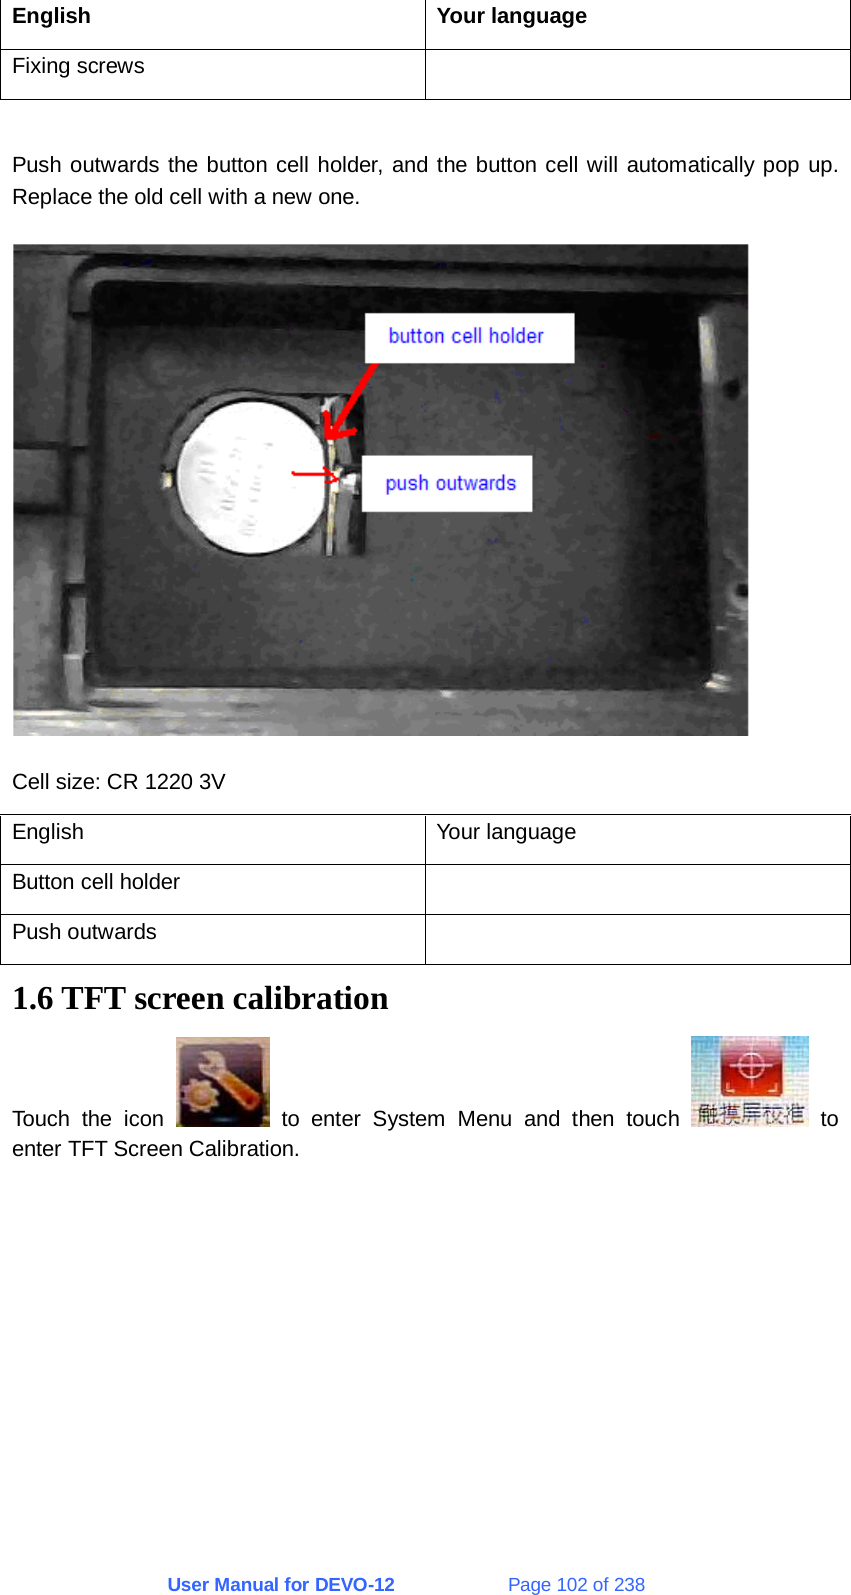 User Manual for DEVO-12             Page 102 of 238 English Your language Fixing screws    Push outwards the button cell holder, and the button cell will automatically pop up. Replace the old cell with a new one.  Cell size: CR 1220 3V English Your language Button cell holder   Push outwards   1.6 TFT screen calibration Touch the icon   to enter System Menu and then touch   to enter TFT Screen Calibration. 